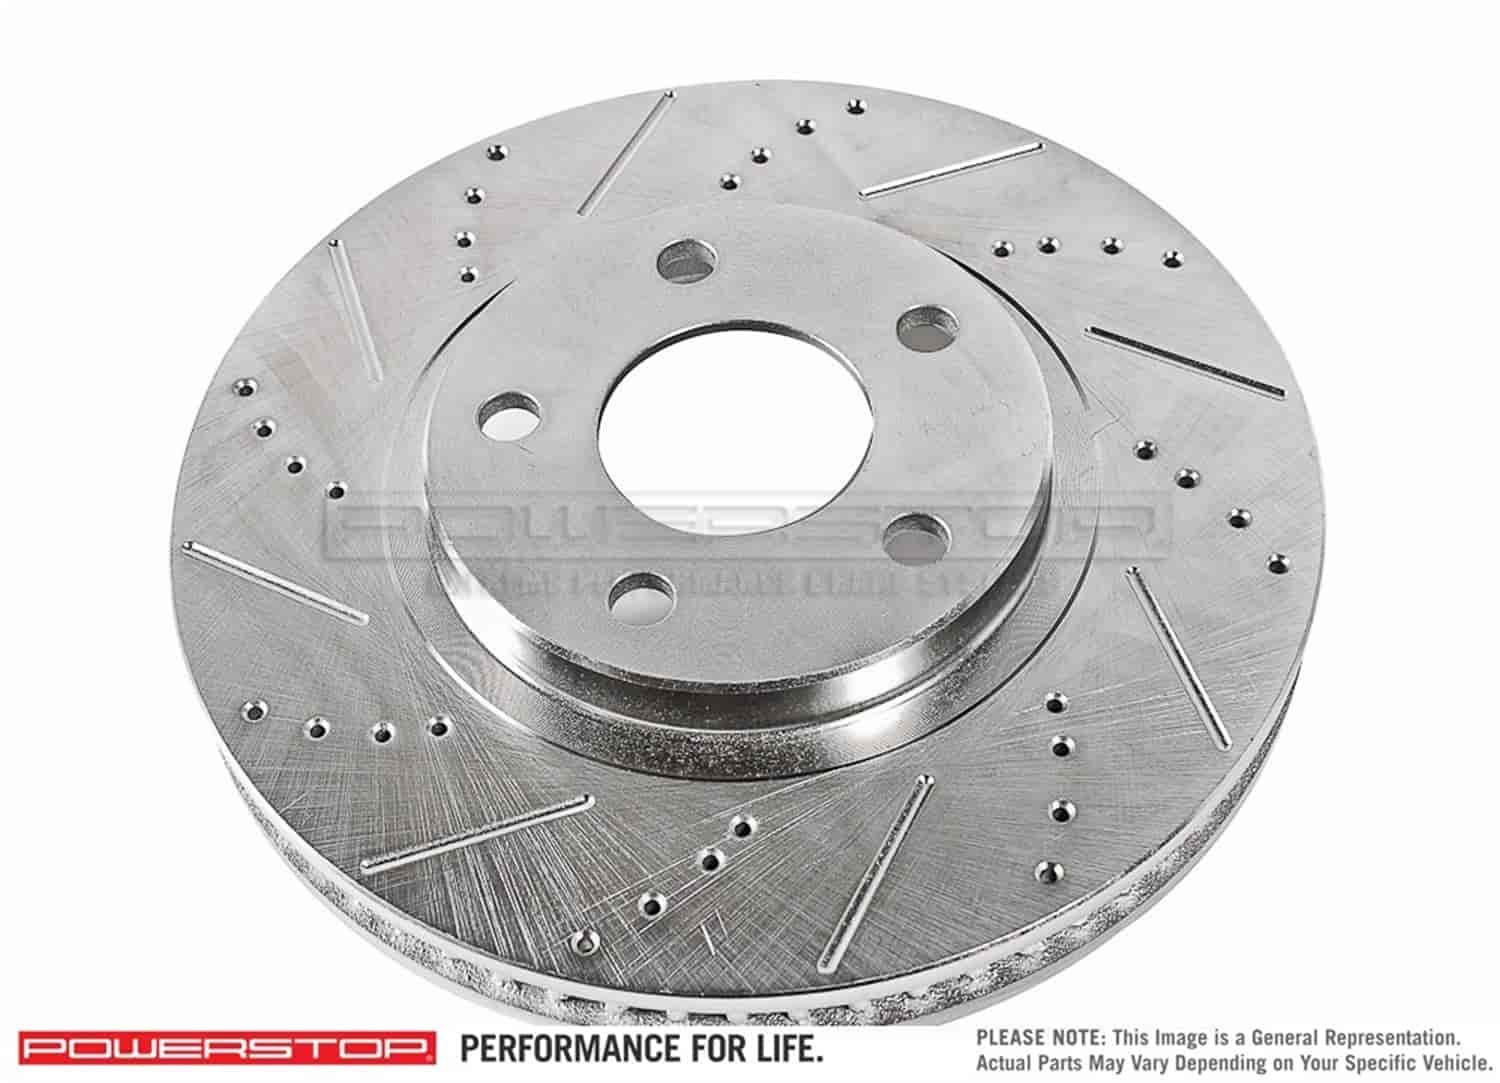 Extreme Performance Drilled And Slotted Front Brake Rotor Fits Select 2003-2005 Ford Models [Left/Driver Side]